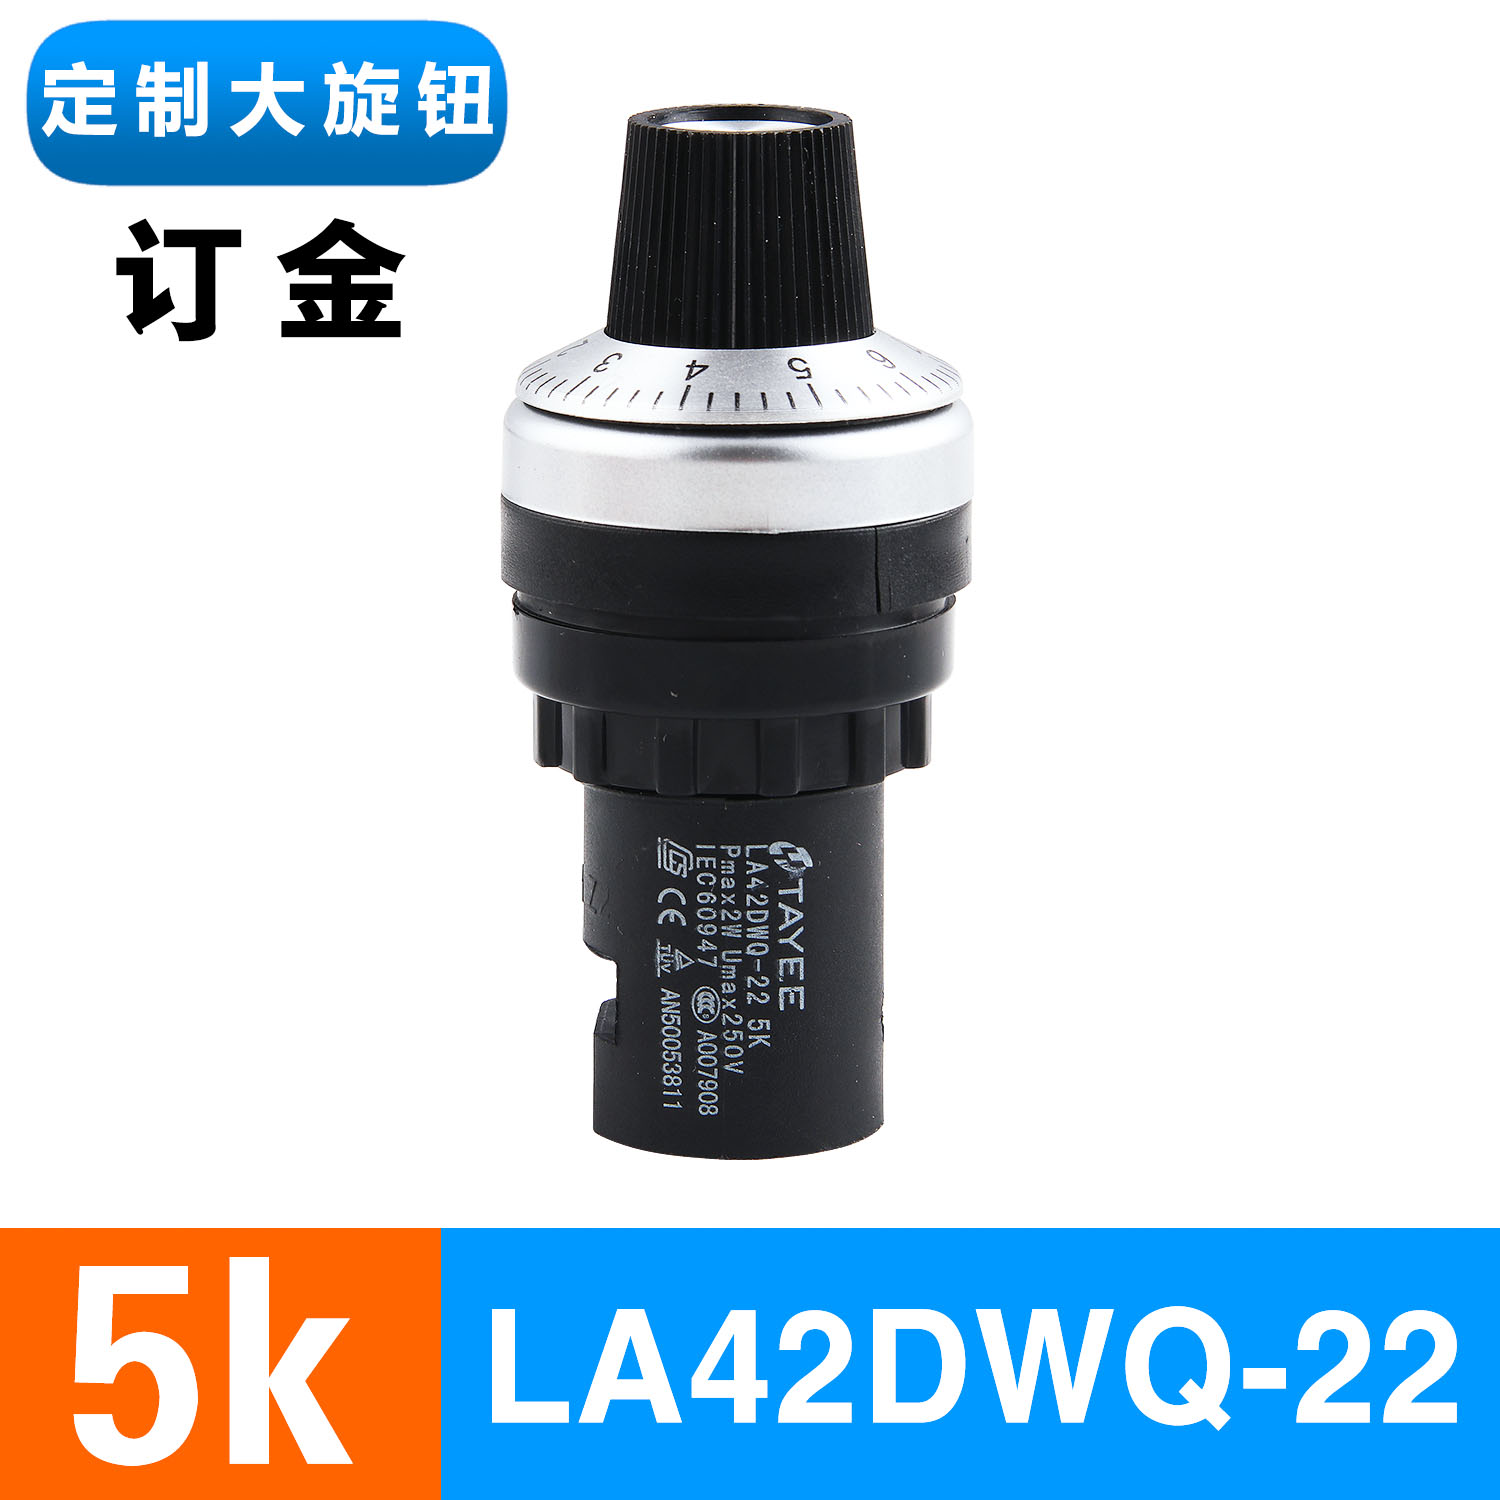 Custom button 5Kquality goods Shanghai Tianyi Frequency converter adjust speed potentiometer precise LA42DWQ-22 governor 22mm5K10K